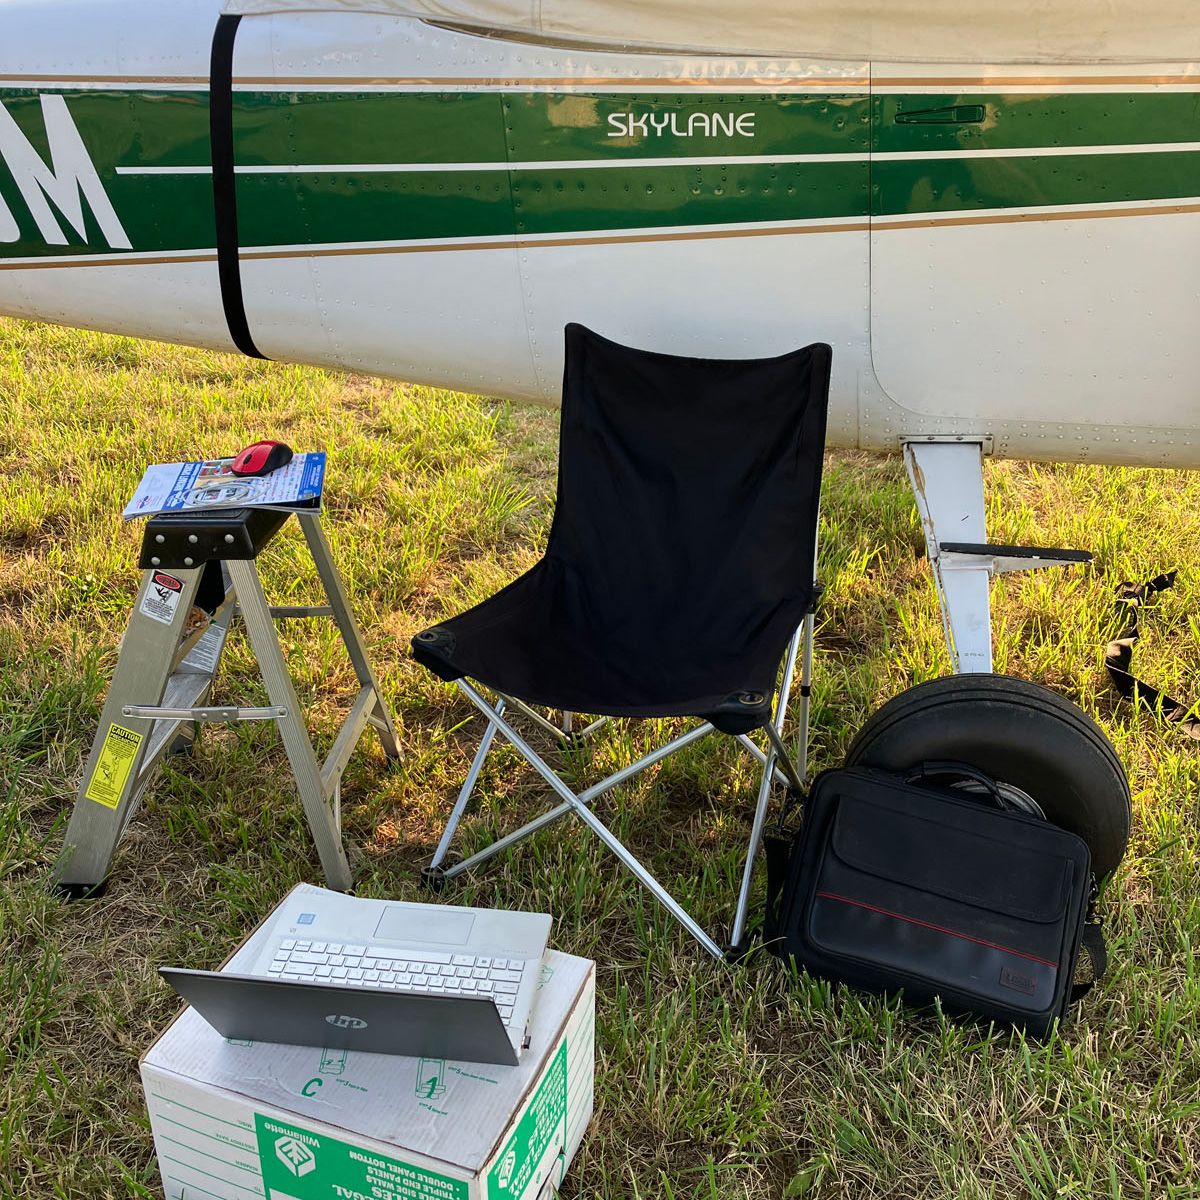 camp set up with laptop, laptop on box, folding chair, and step ladder under wing of plane